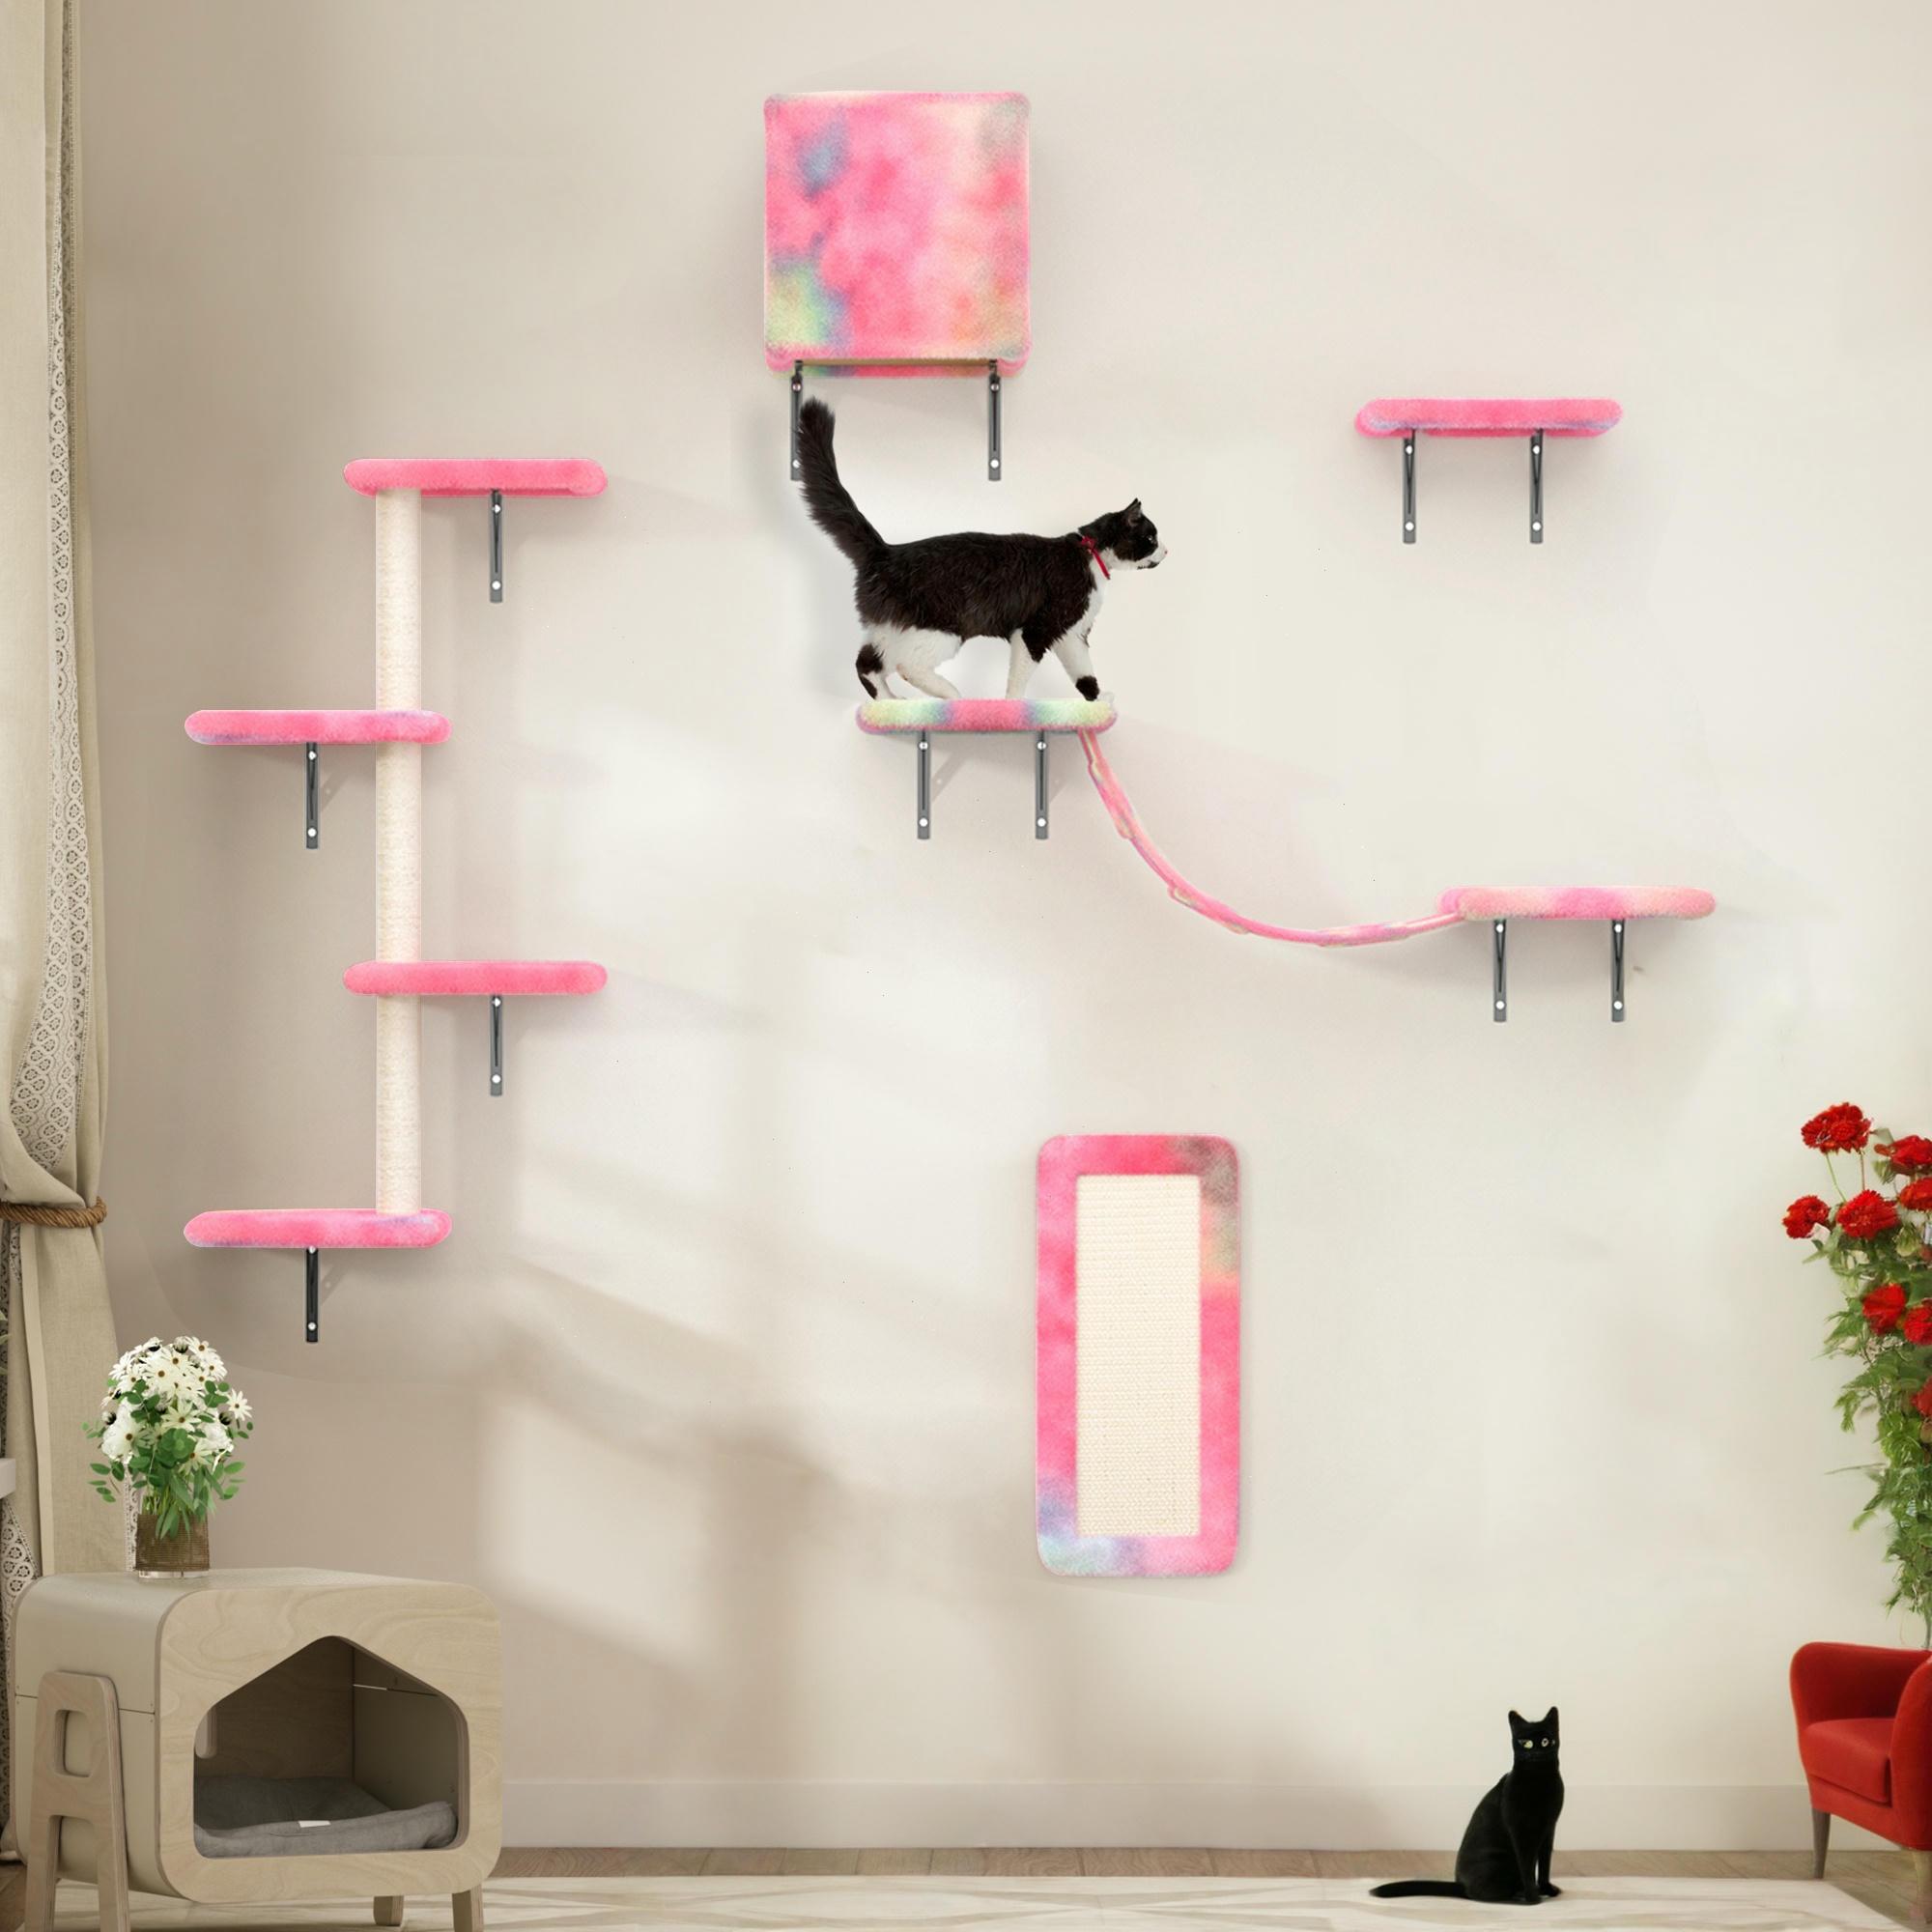 

5 Pcs Wall Mounted Cat Climber Set, Floating Cat Shelves And Perches, Cat Activity Tree With Scratching Posts, Modern Cat Furniture Colorful